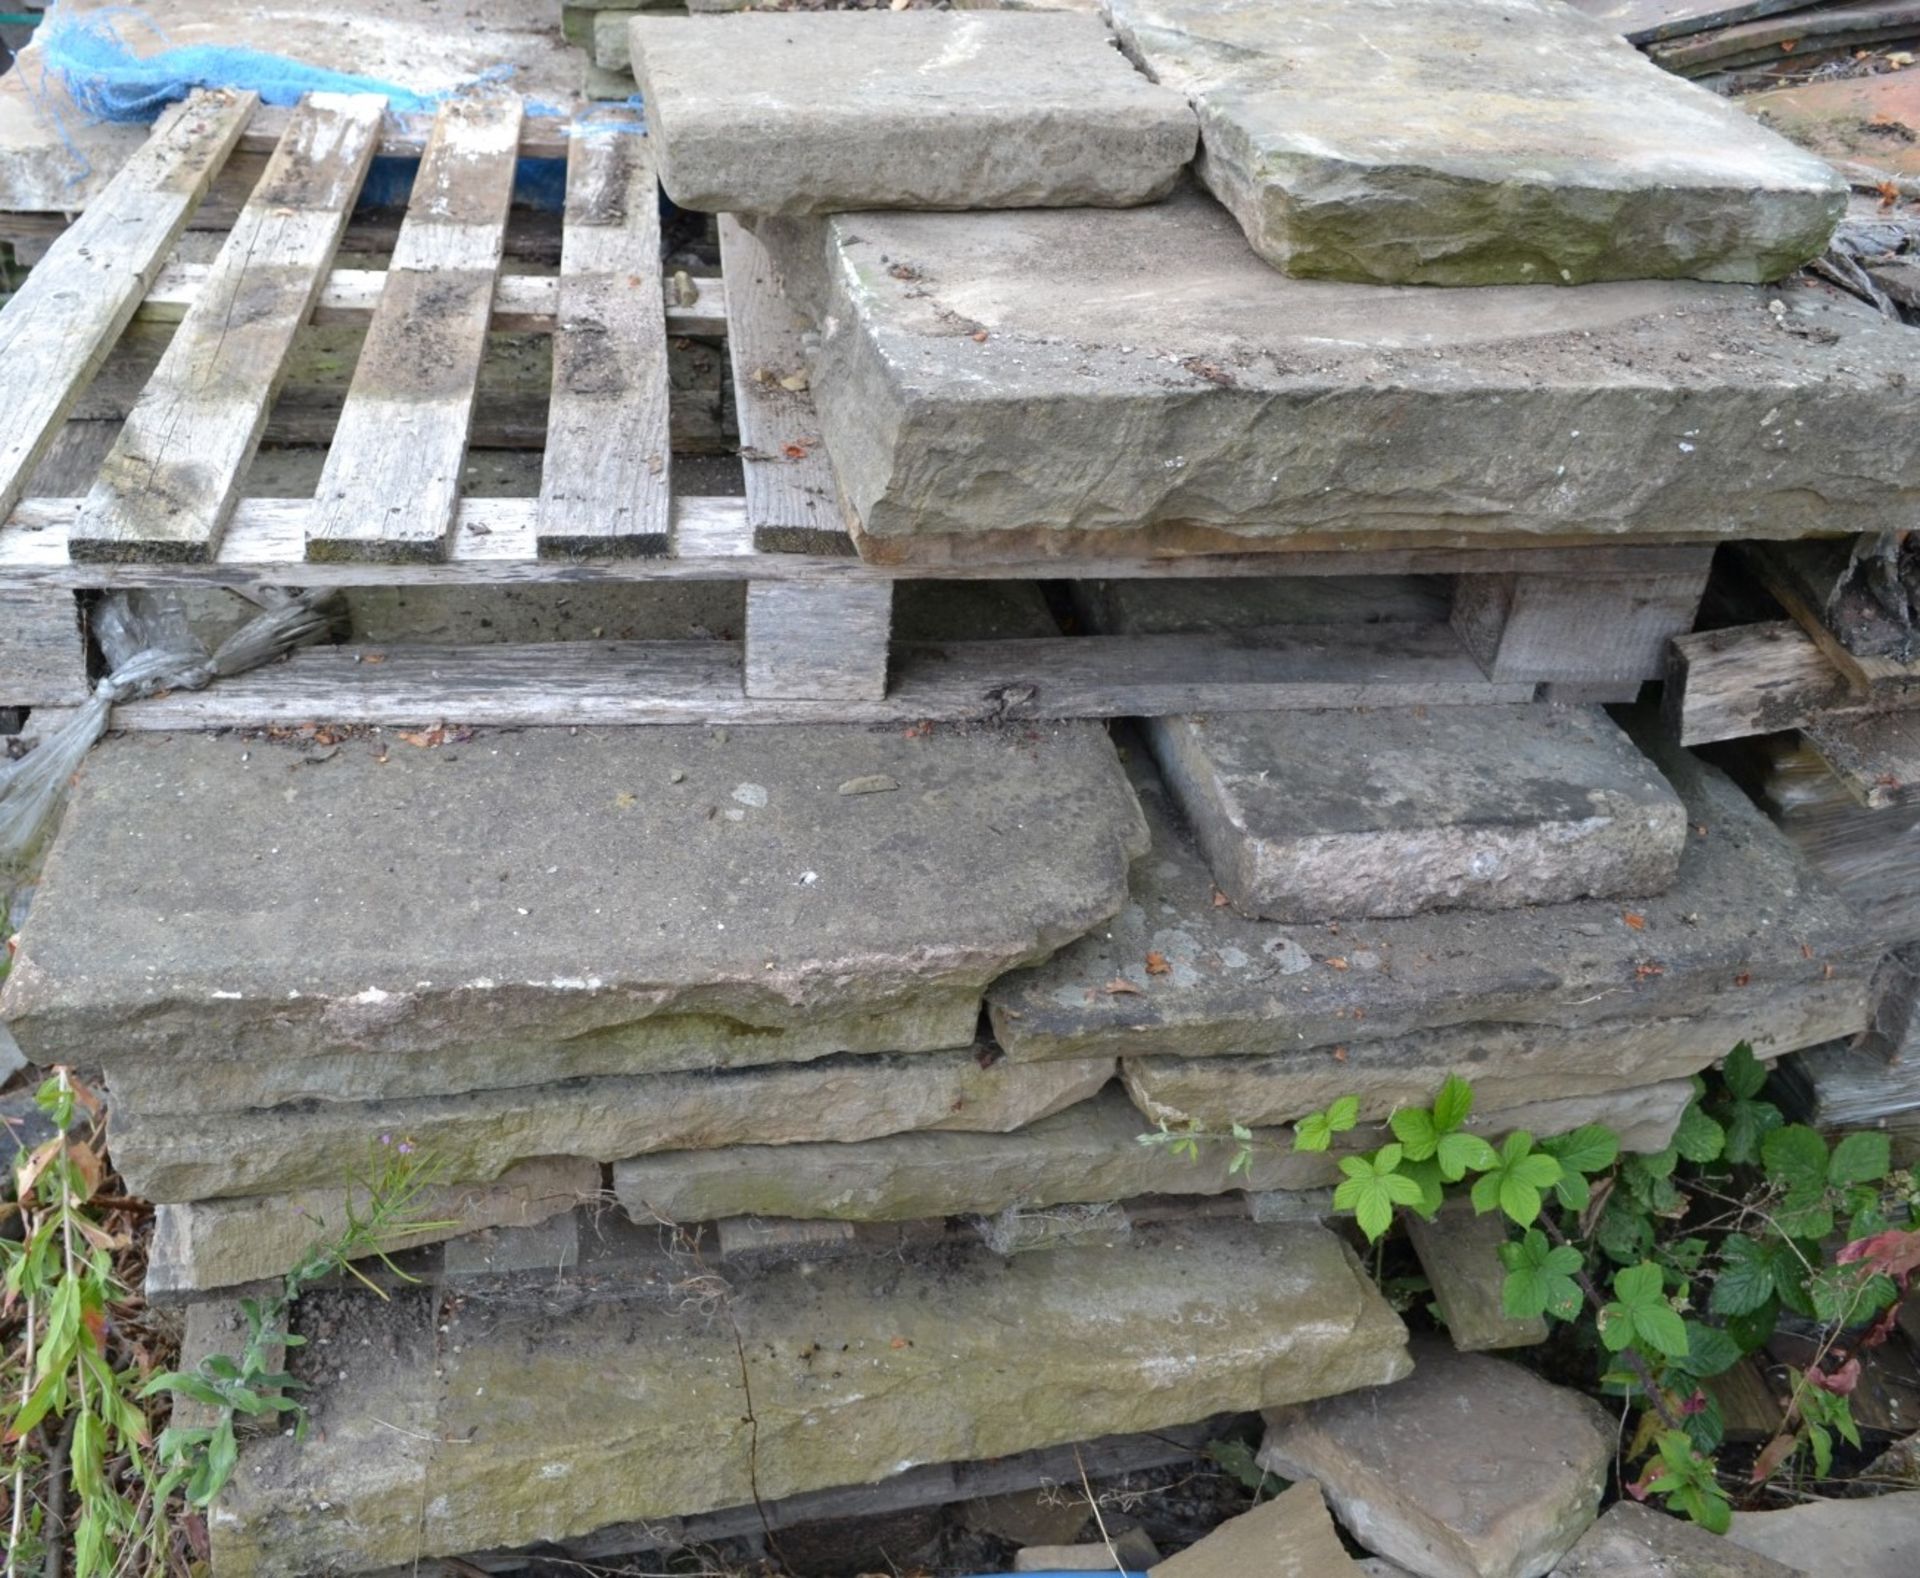 36 x Reclaimed York Stone Paving Flags - Assorted Sizes, Approx 10 Square Metres In Total - Recently - Image 2 of 3